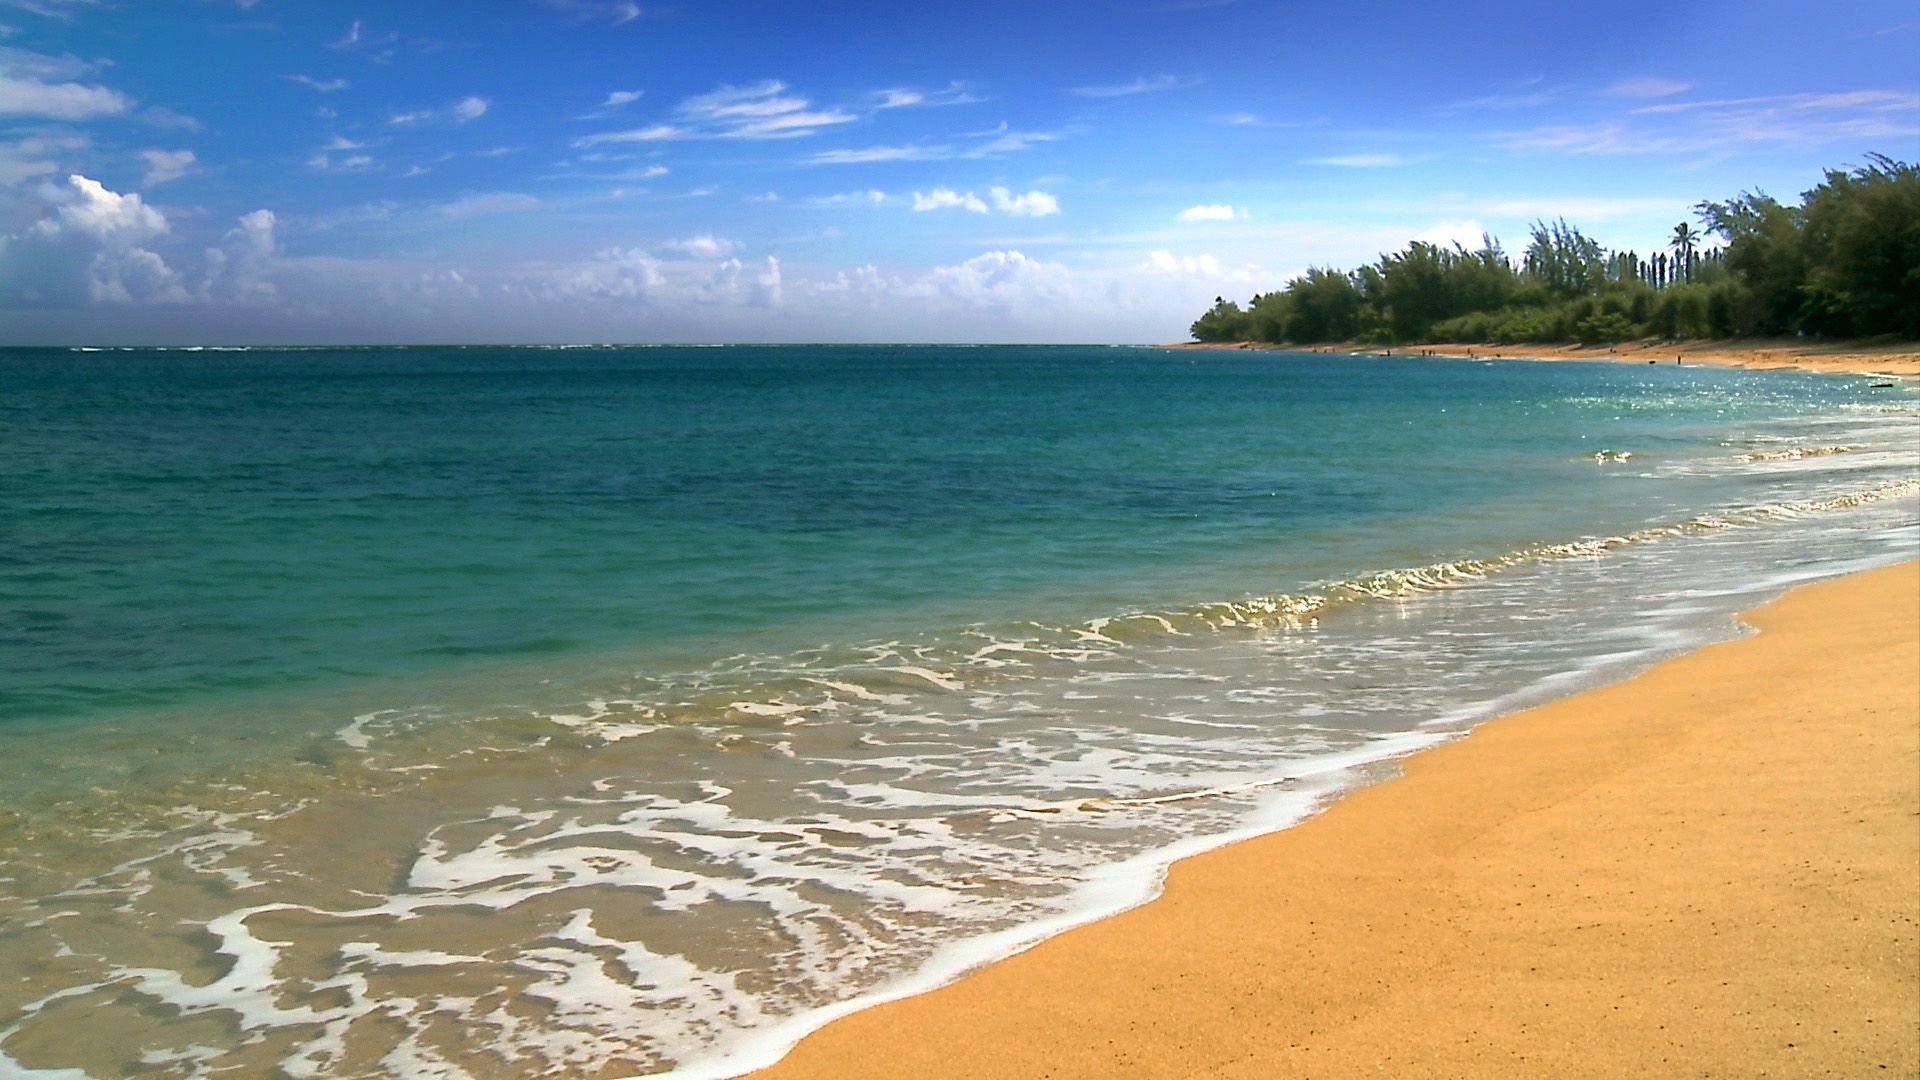 1920x1080 ... beautiful and remote beaches from the most popular Hawaiian Islands:  Kauai, Oahu, Maui, and Hawaii recorded in stunning FULL HIGH DEFINITION -  1080p.